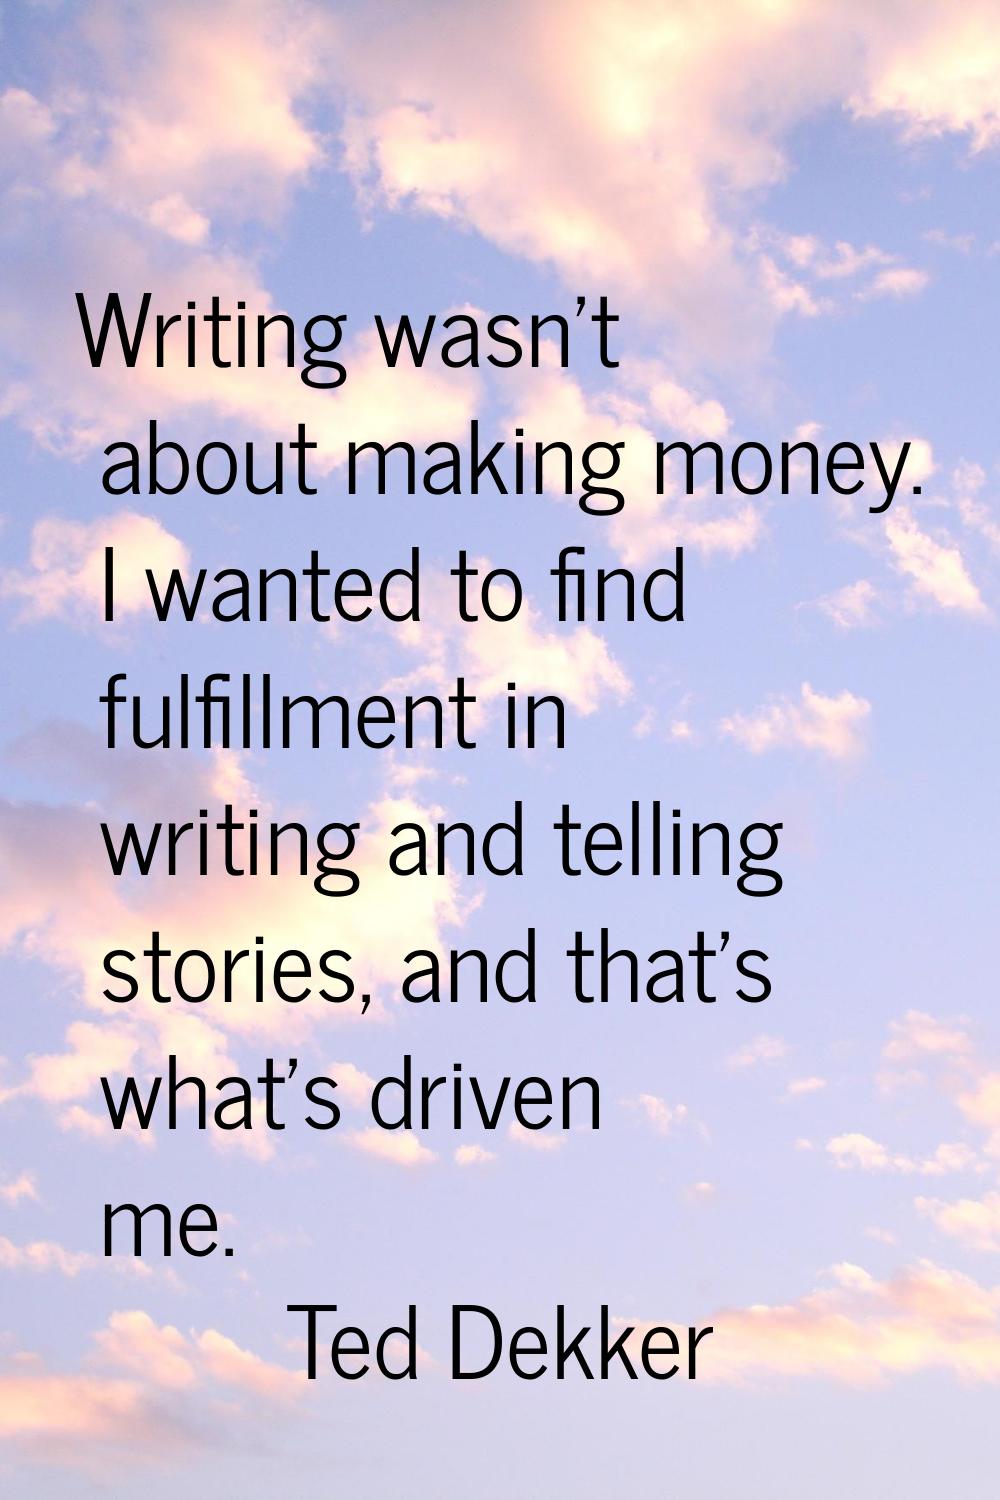 Writing wasn't about making money. I wanted to find fulfillment in writing and telling stories, and